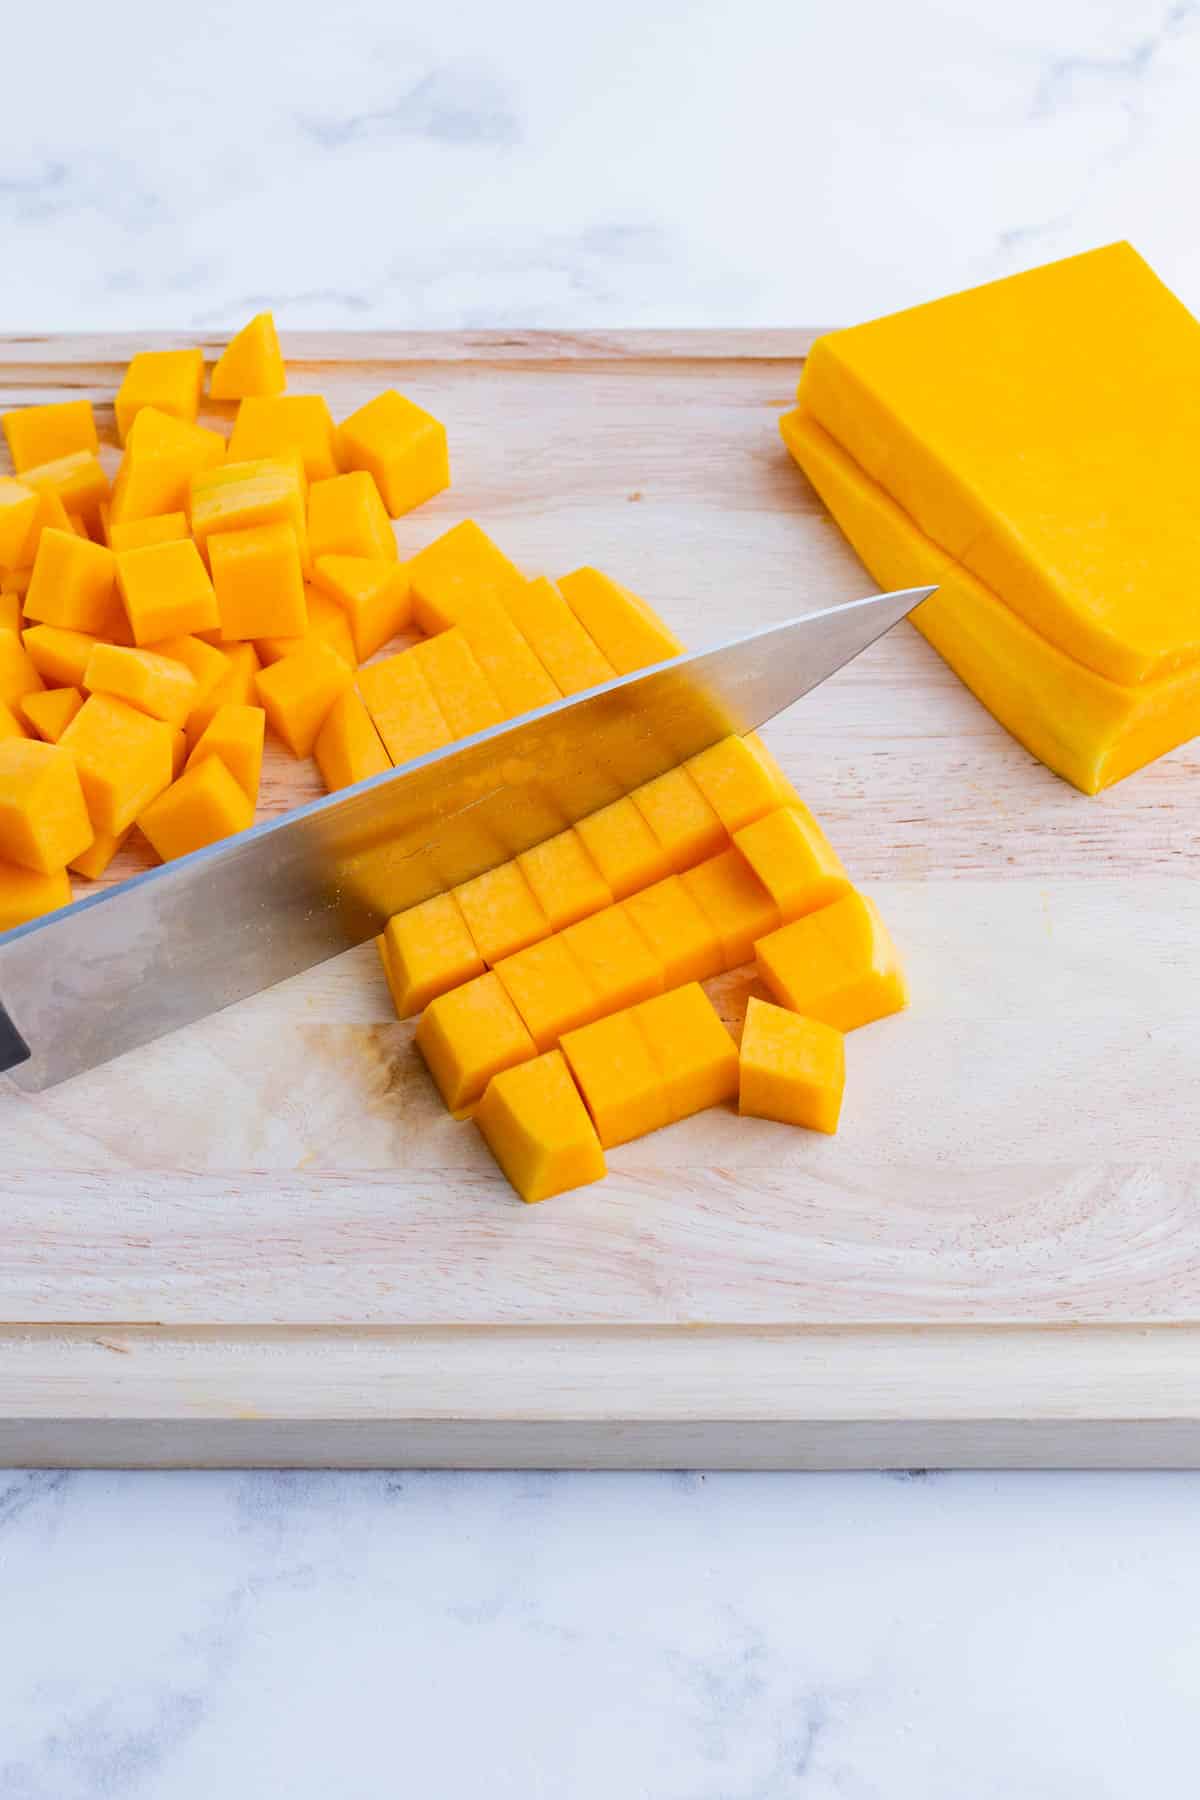 A butternut squash is cut into small cubes.